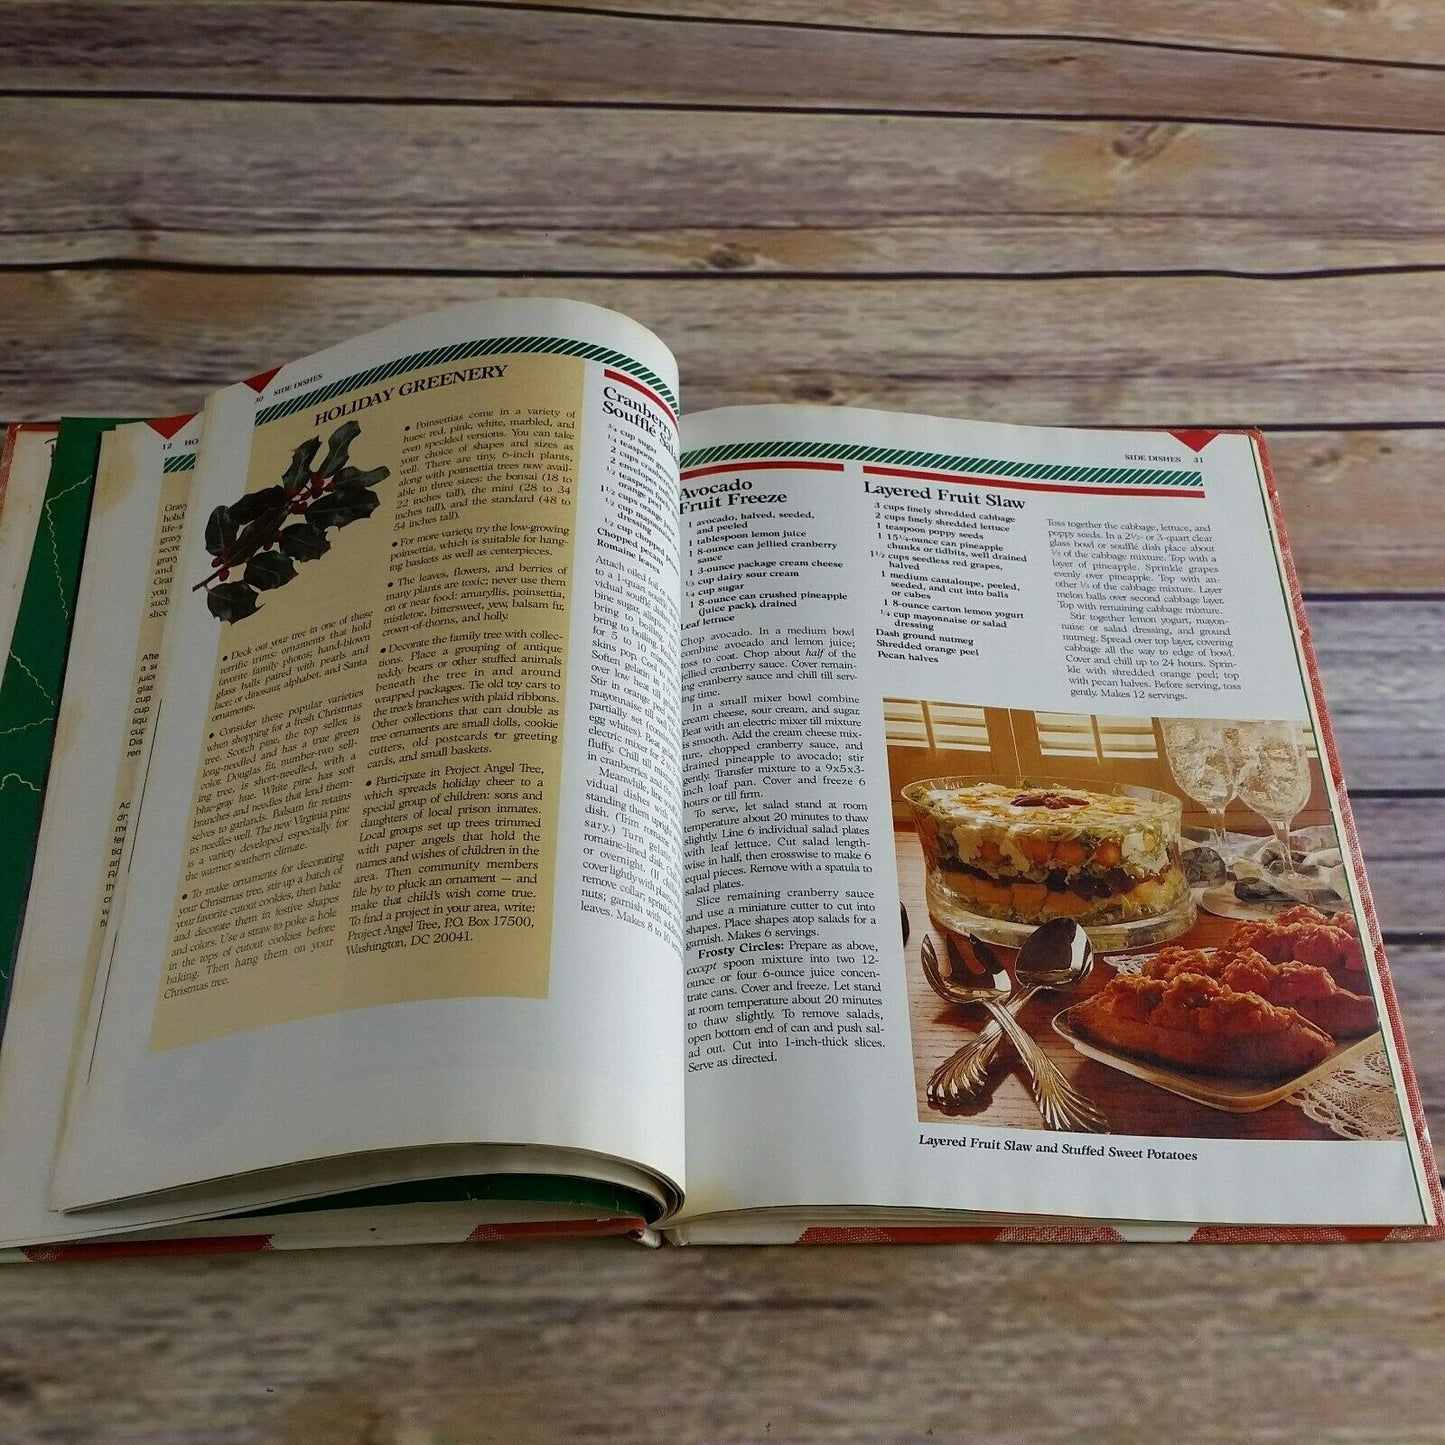 Vtg Homemade Holidays Cookbook Better Homes and Gardens Recipes for Holidays 1990 Hardcover Hannukah Gifts From the Kitchen